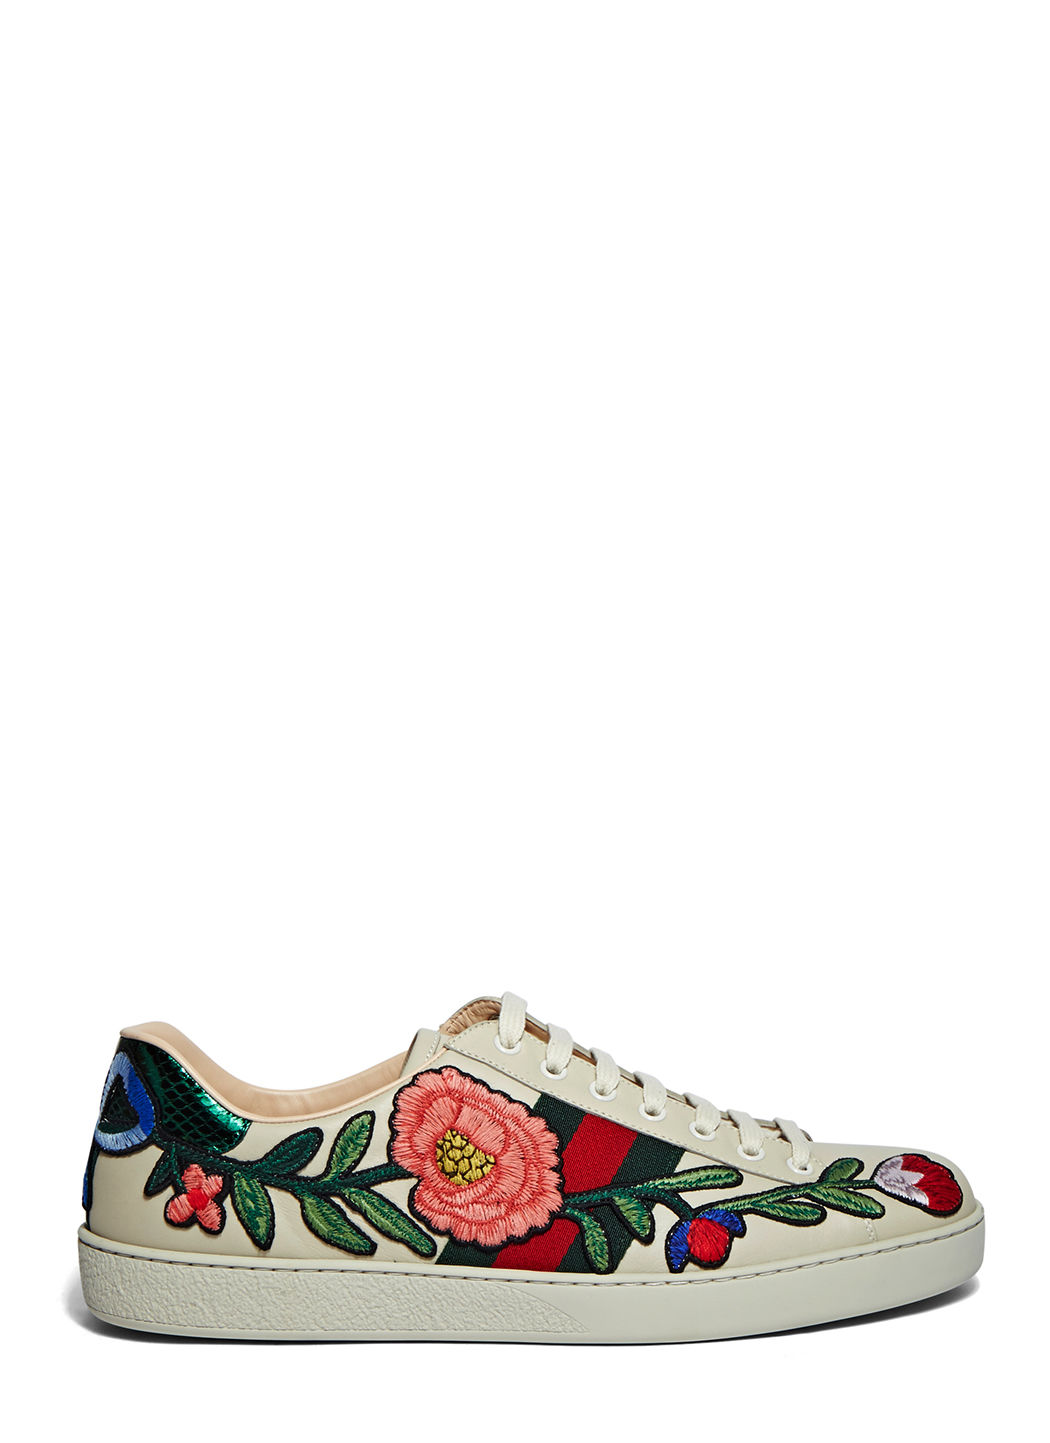 gucci mens floral sneakers